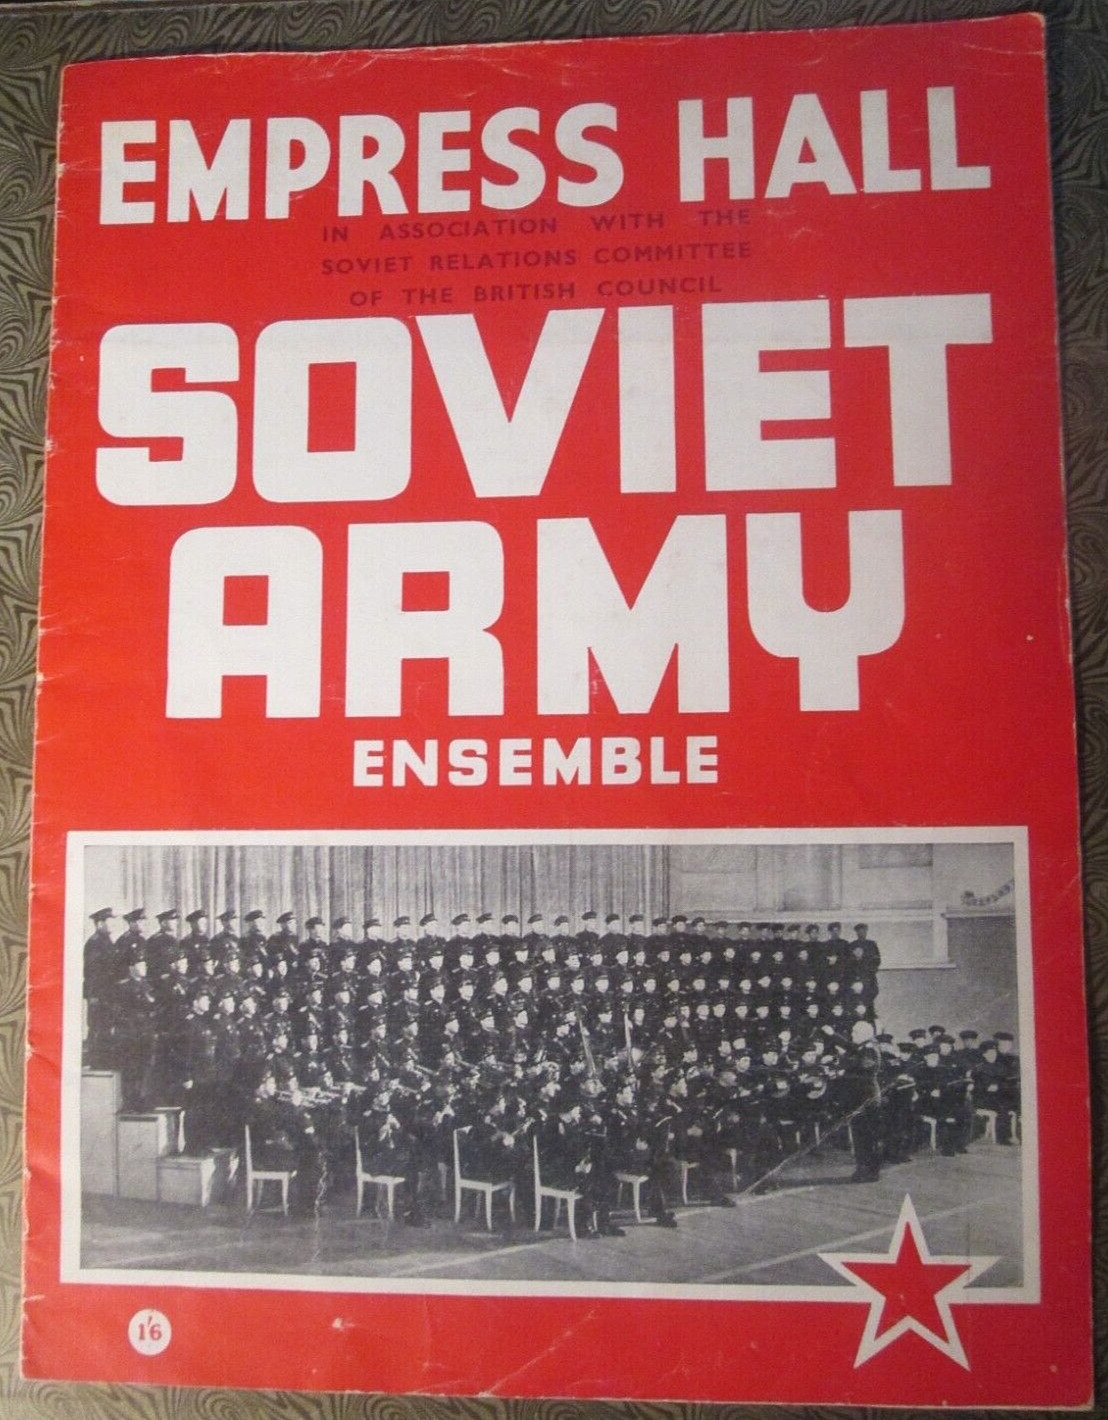 MILITARY--SOVIET ARMY ENSEMBLE PROGRAMME FROM THE EMPRESS HALL,1956